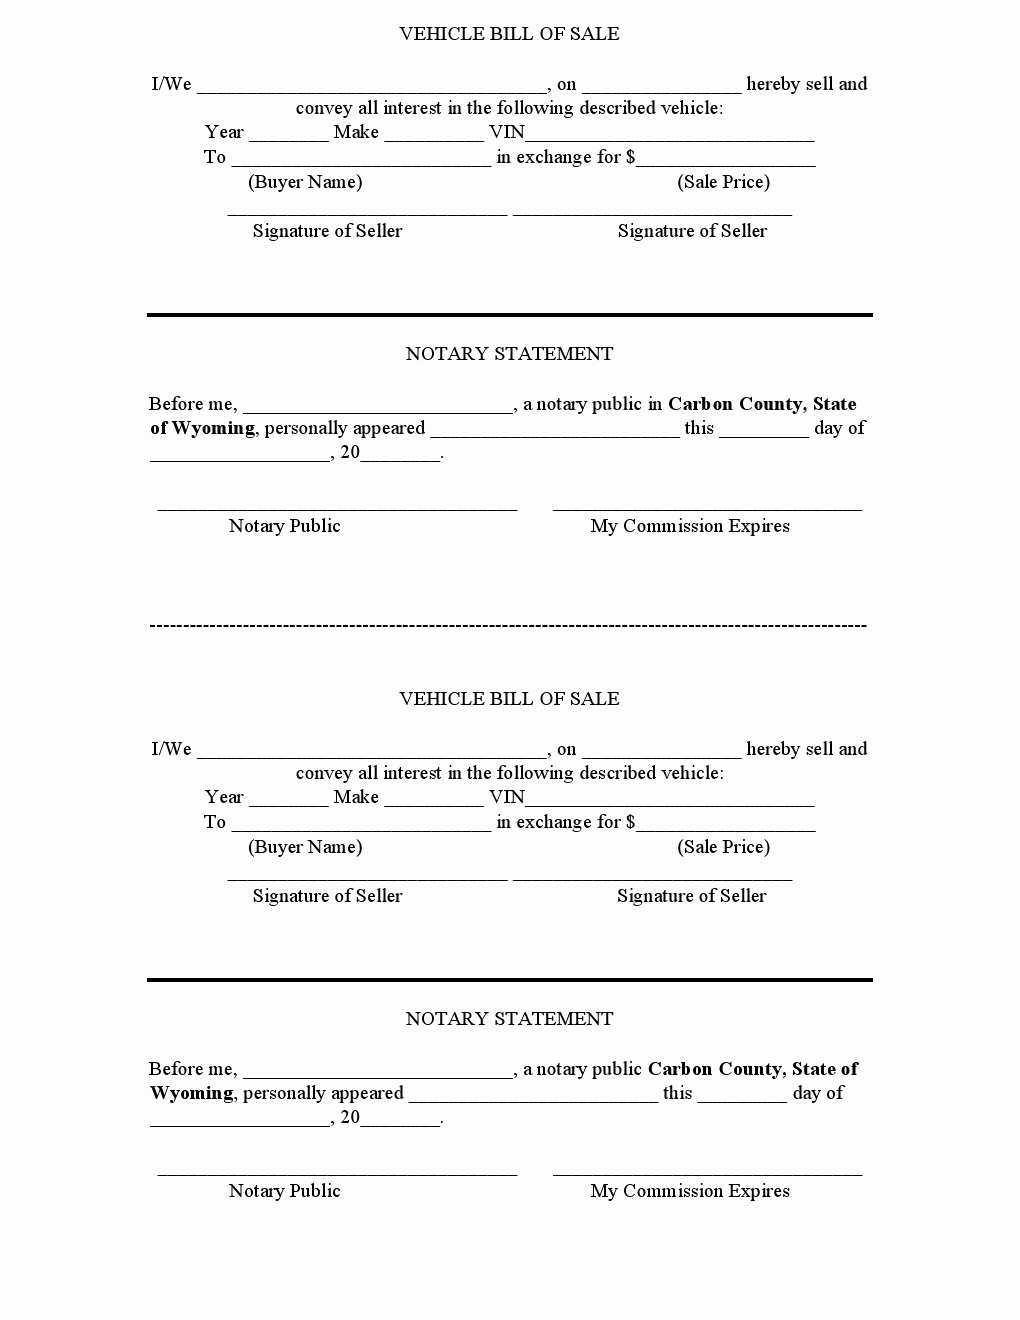 Ga Auto Bill Of Sale Unique Free Carbon Country Vehicle Bill Of Sale form Download